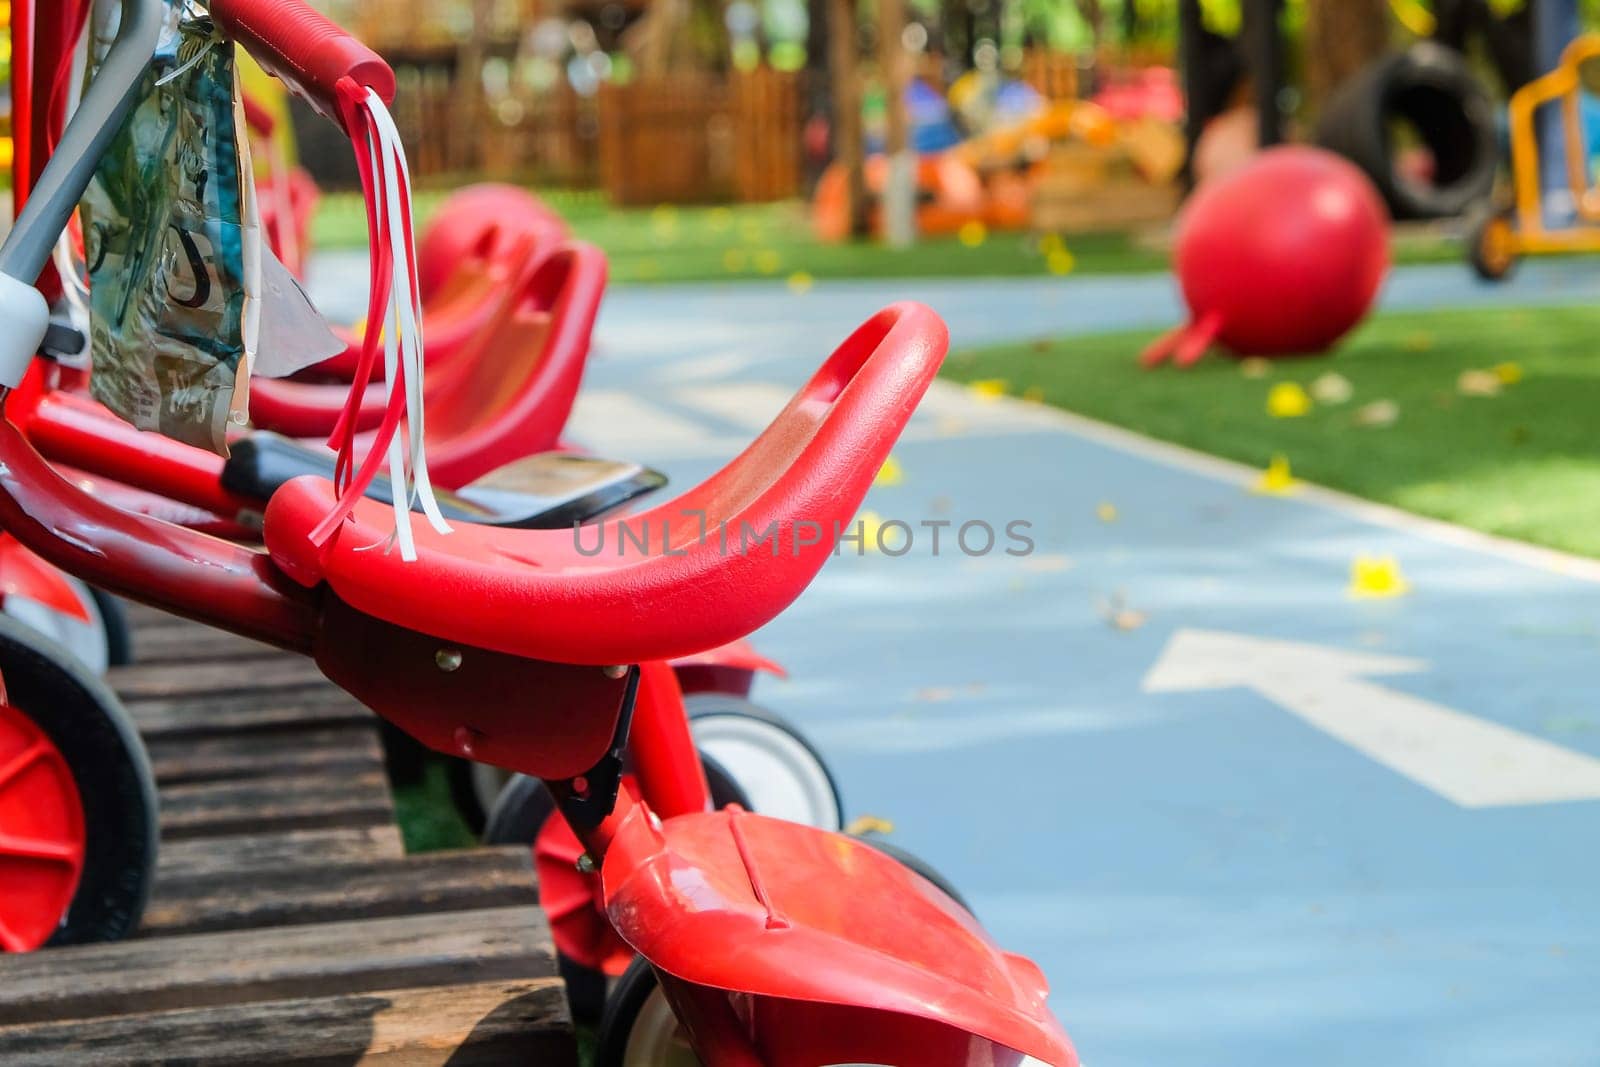 Playground with red toy car on green grass field in public park by ponsulak